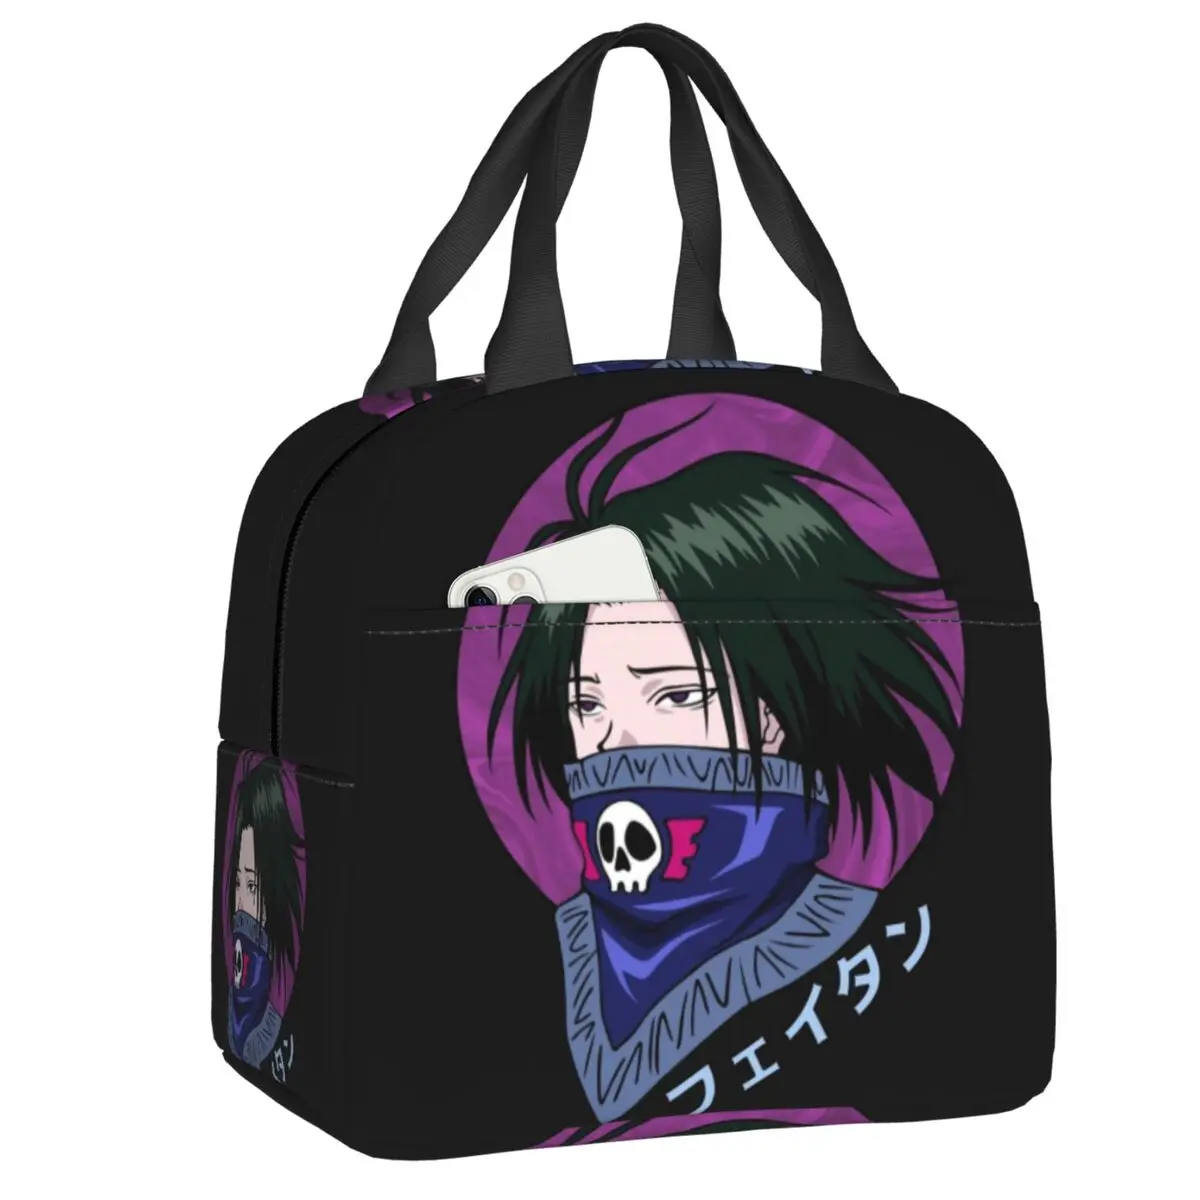 HXH Feitan Anime Thermal Insulated Lunch Bag Women Hunter X Hunter Resuable Lunch Tote for Outdoor Picnic Multifunction Food Box